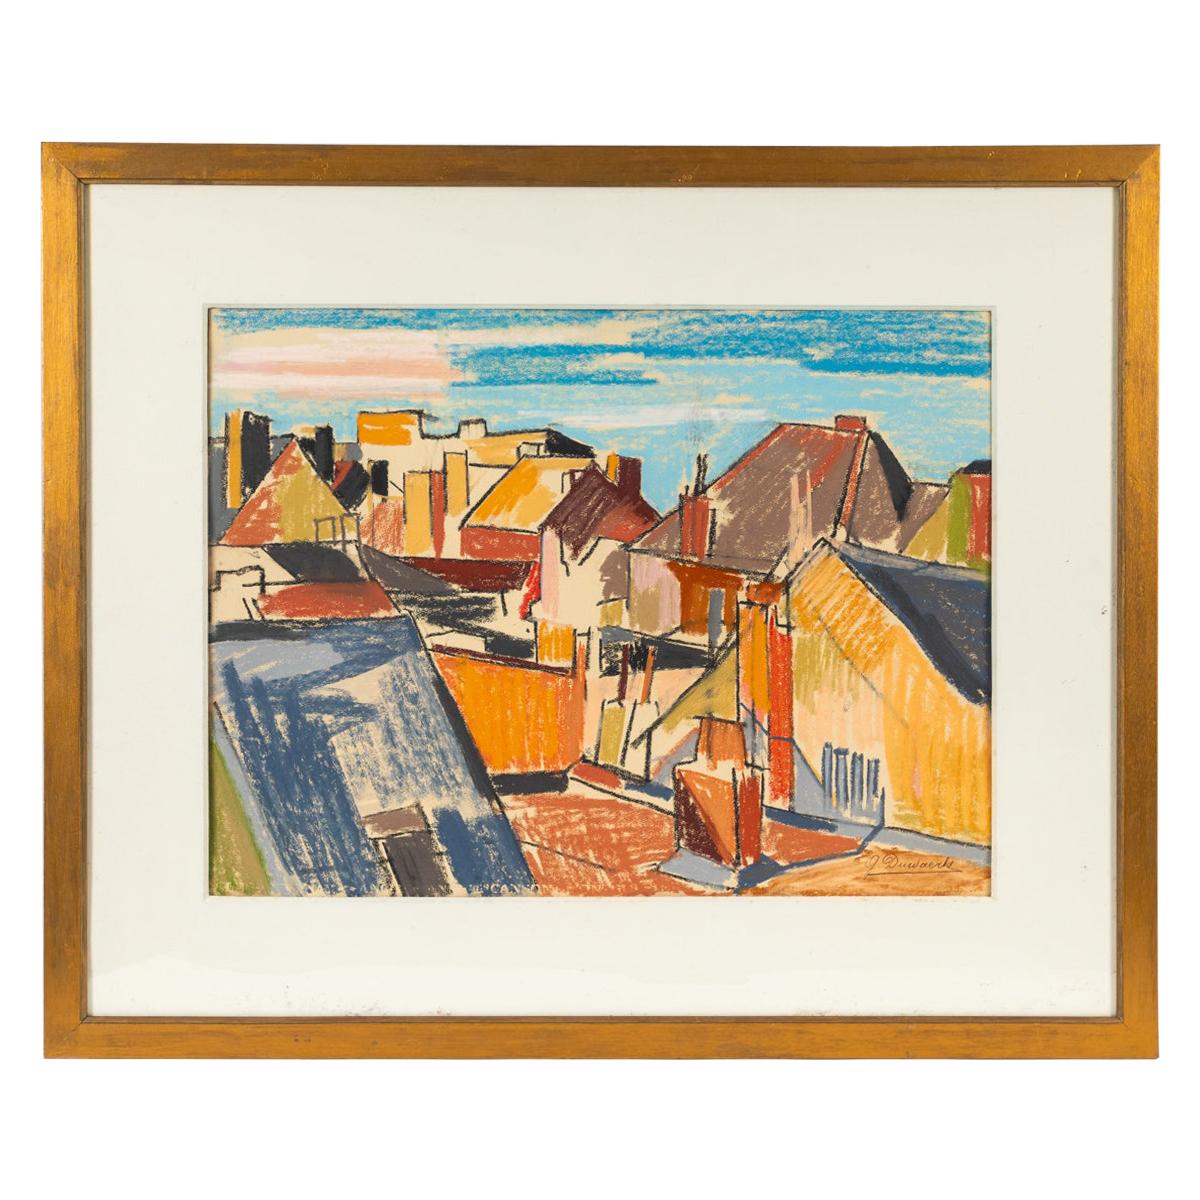 Colorful Abstract Seaside Cityscape Drawing from Belgium, circa 1898